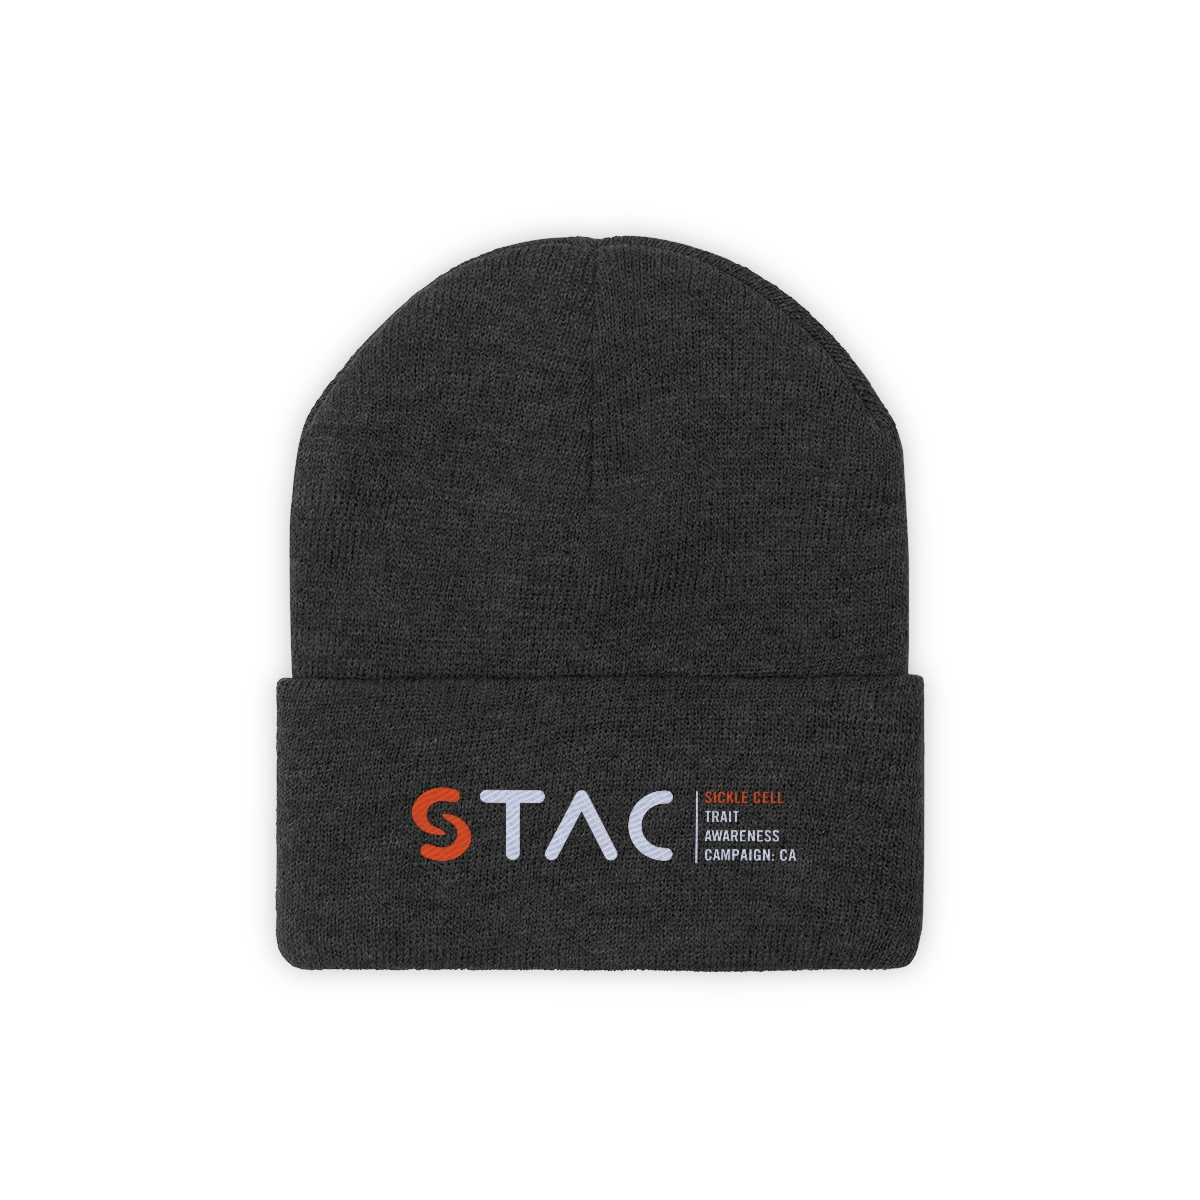 Flat front view of dark ash colored beanie-style knit hat with the STAC logo embroidered on the folded area.